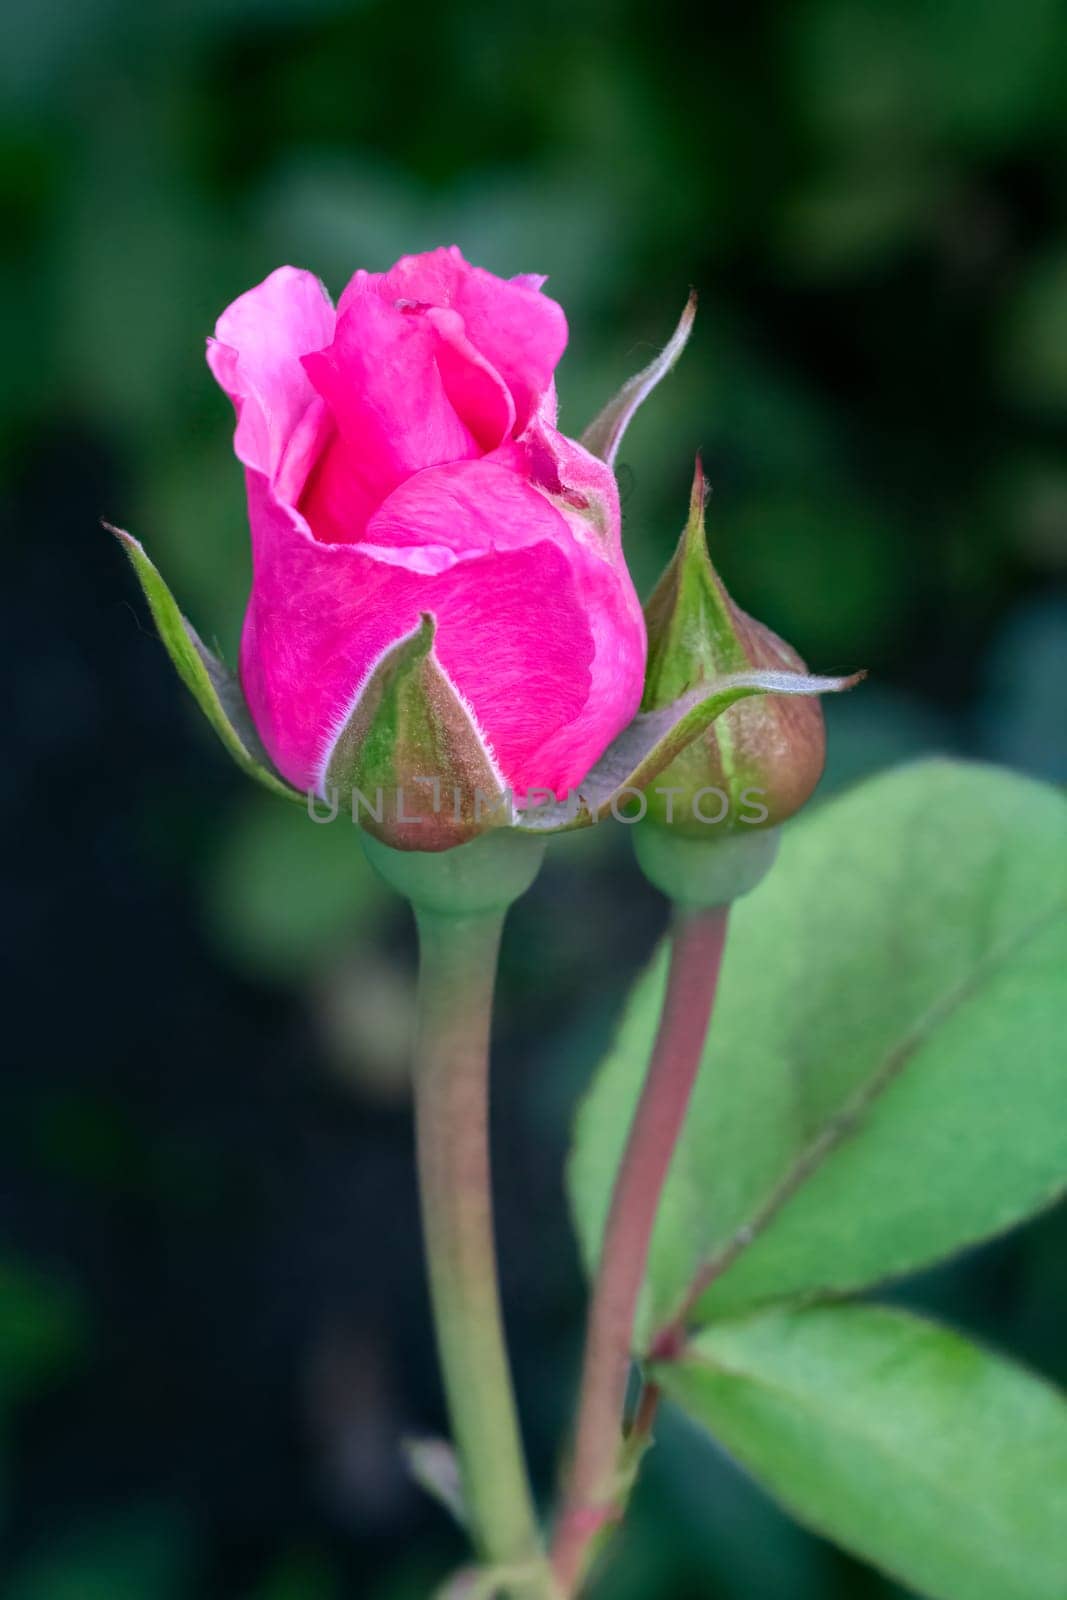 Close-up view of a red rose bud on a stem on the blurred natural background. Shallow depth of field.